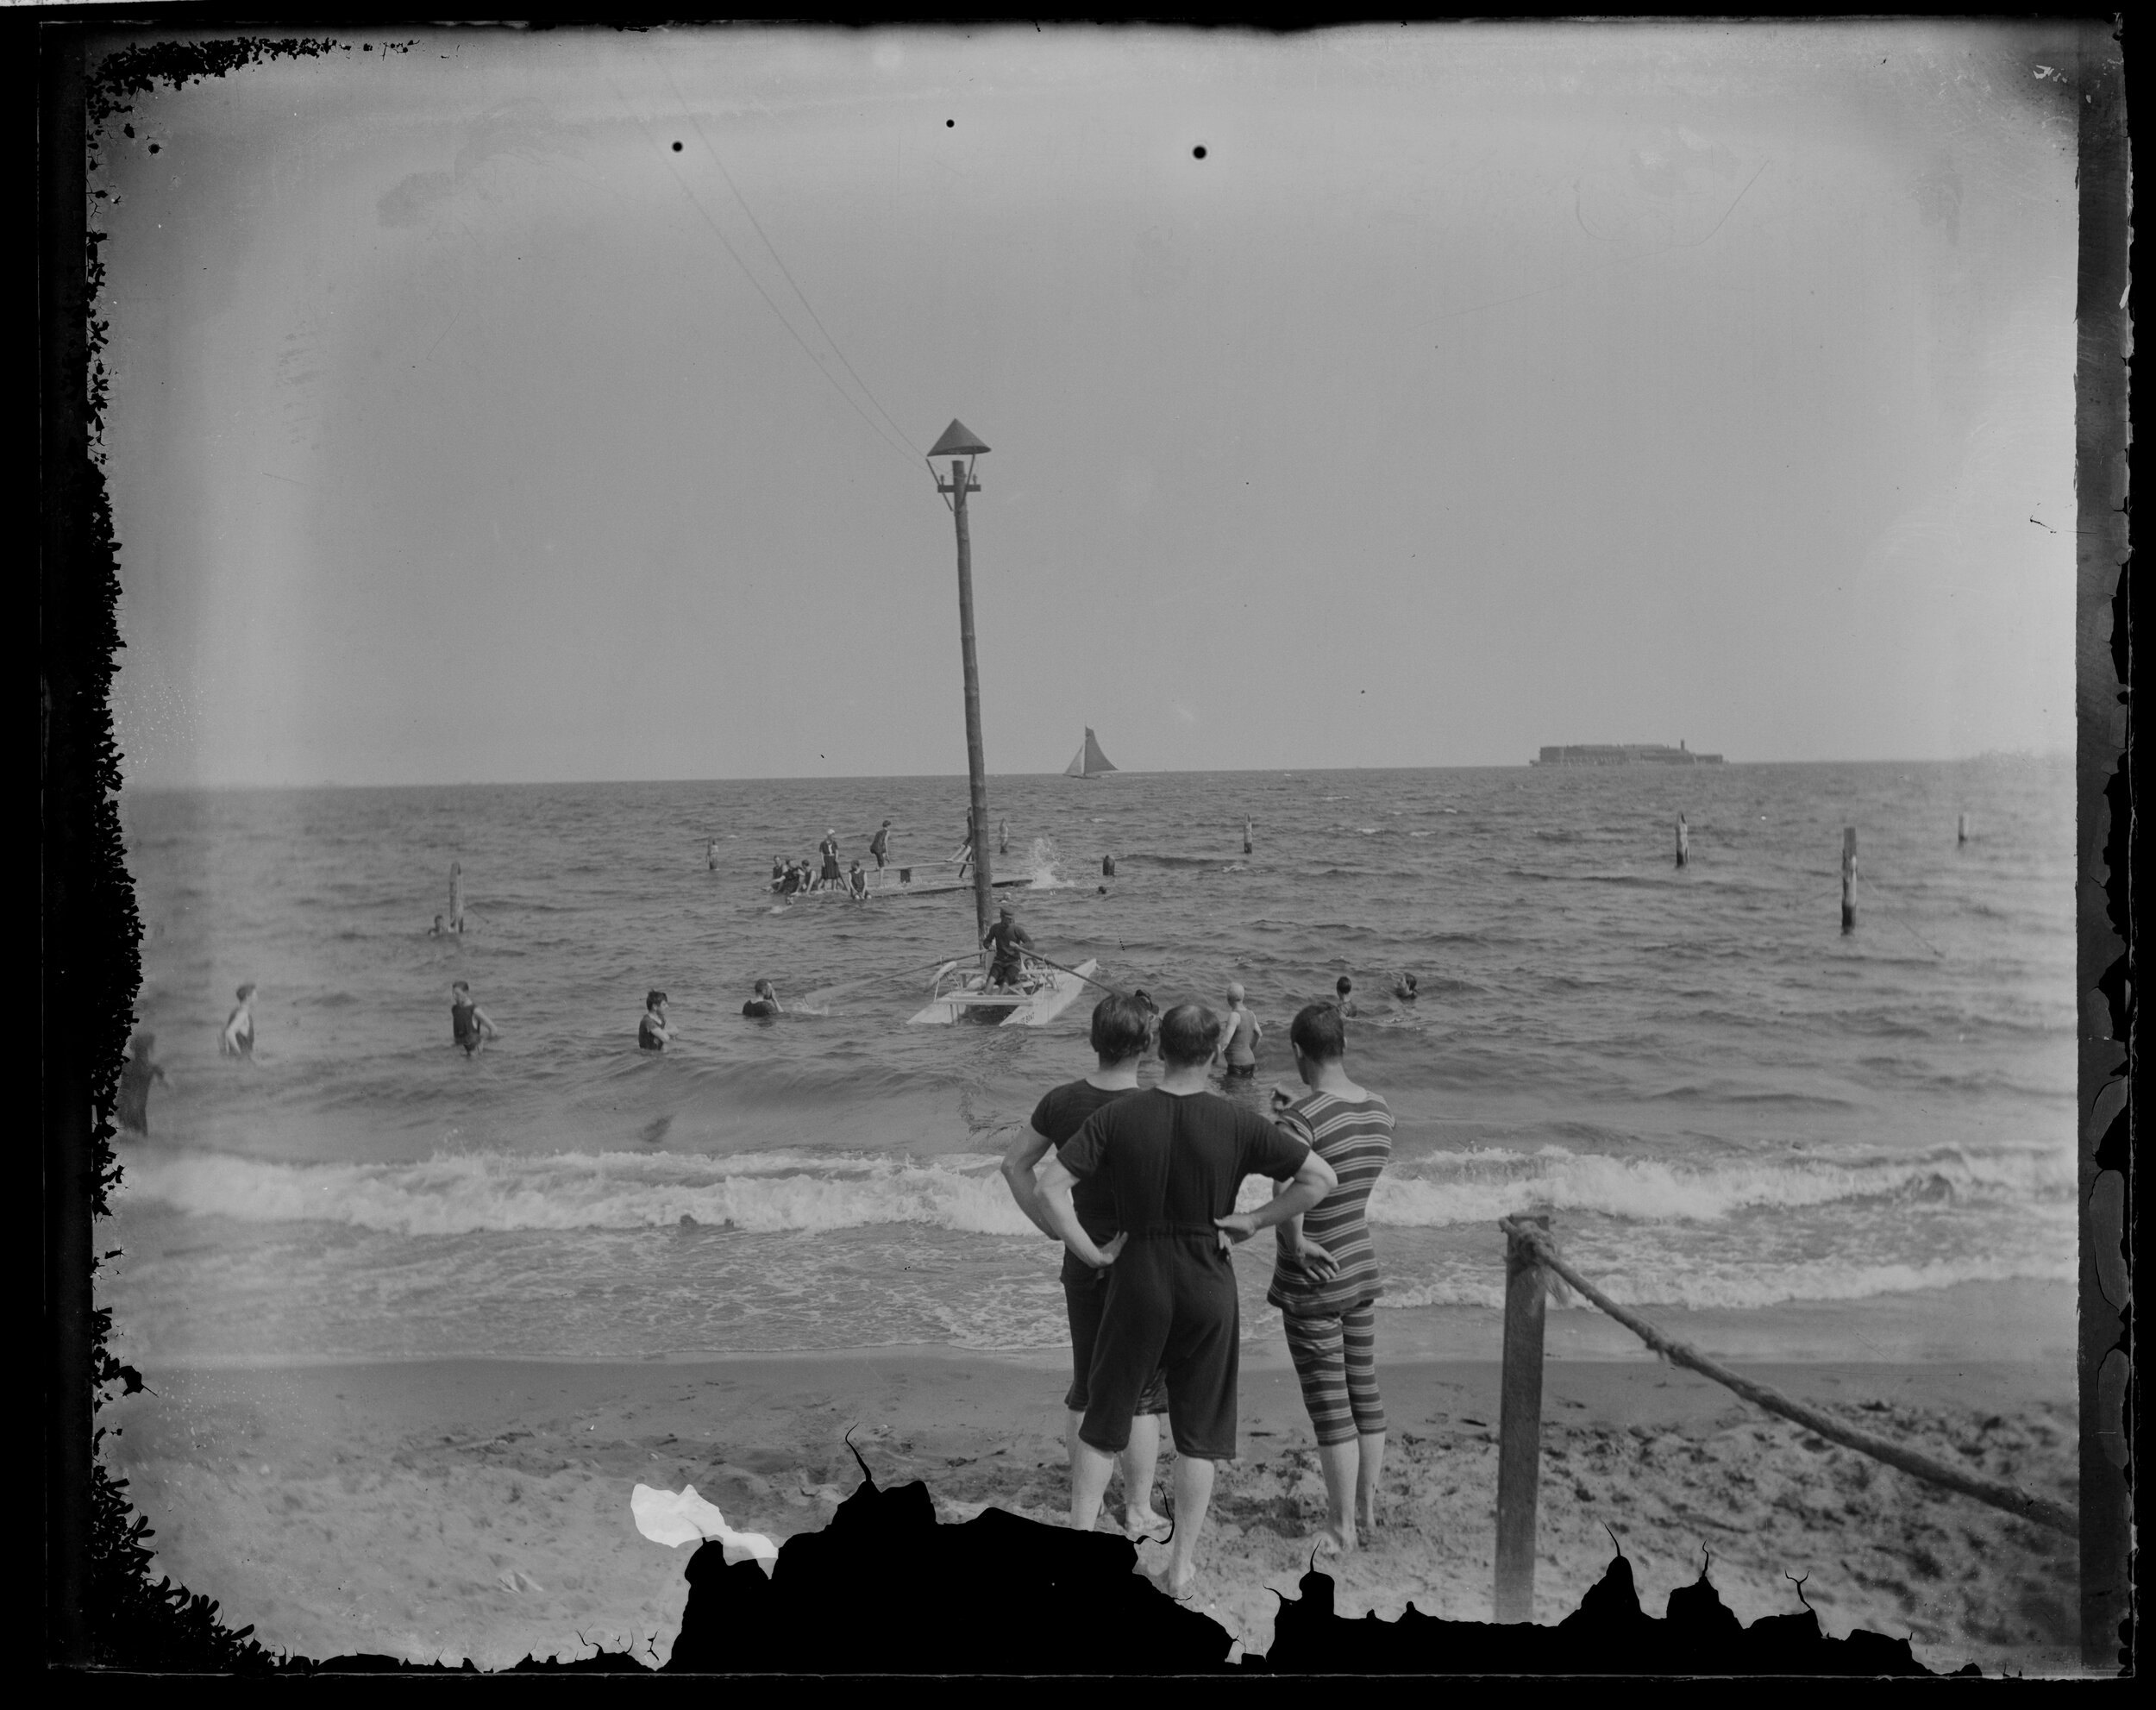  Bathers at South Beach, Staten Island. Photo by Alice Austen, ca. 1885-1895. 